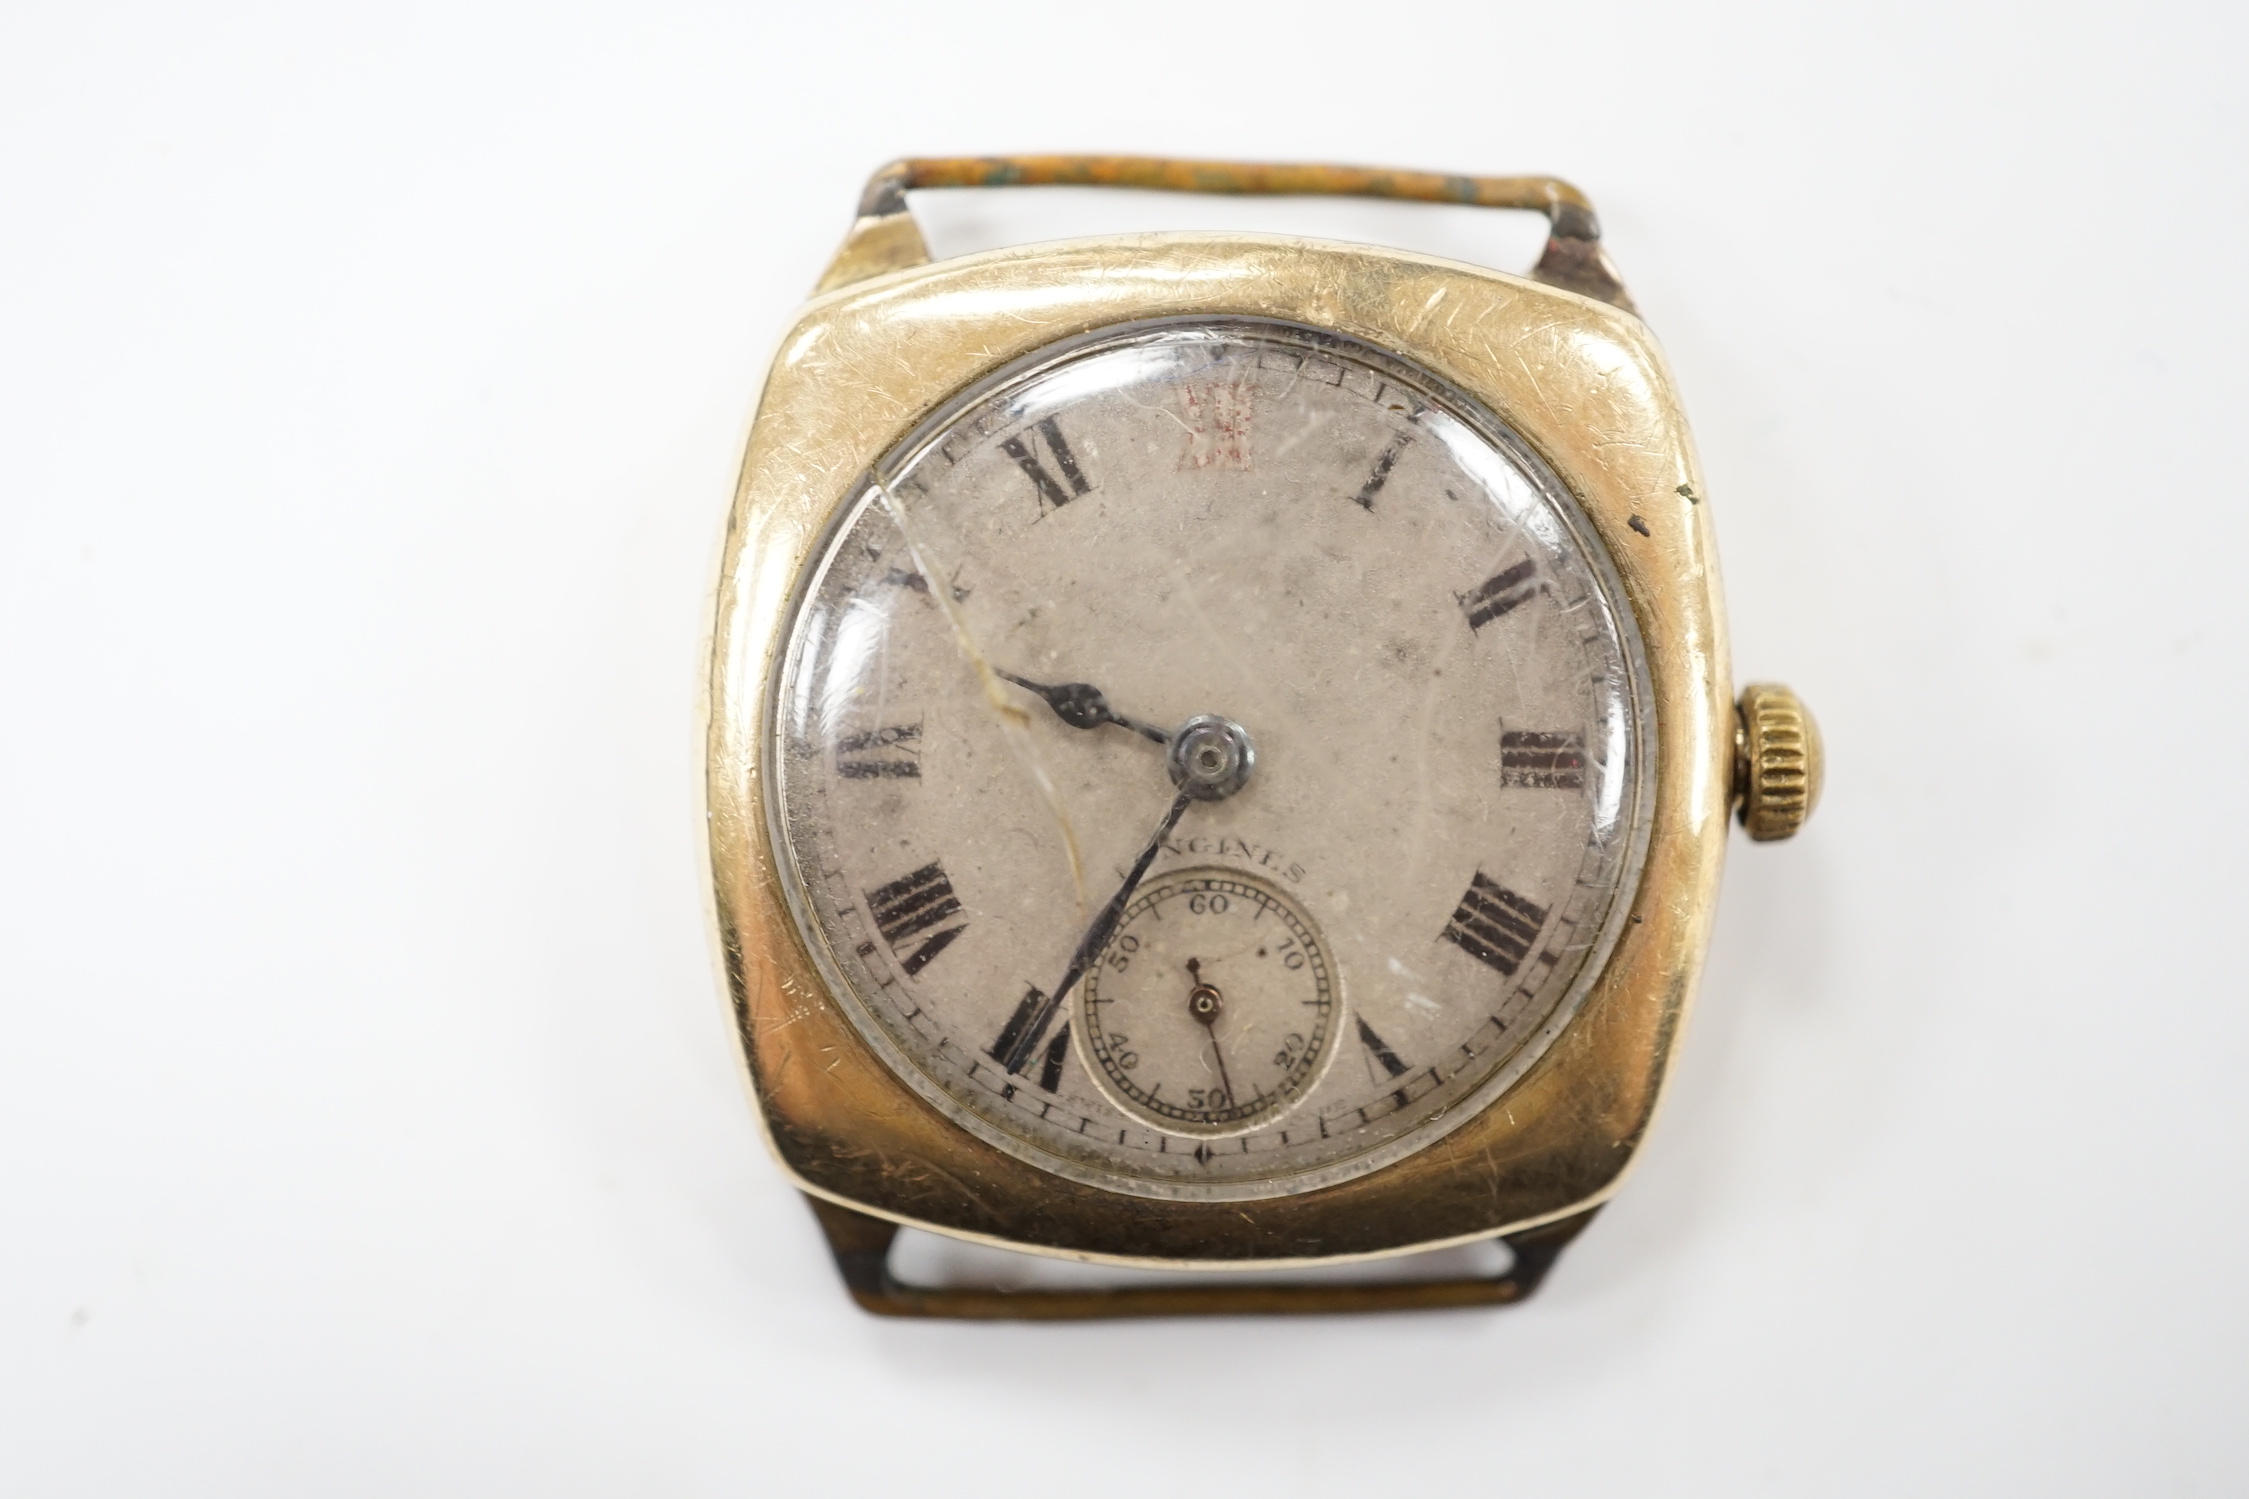 A gentleman's 1930's 9ct gold Longines manual wind wrist watch, with Roman dial, subsidiary seconds and case back inscription, no strap.